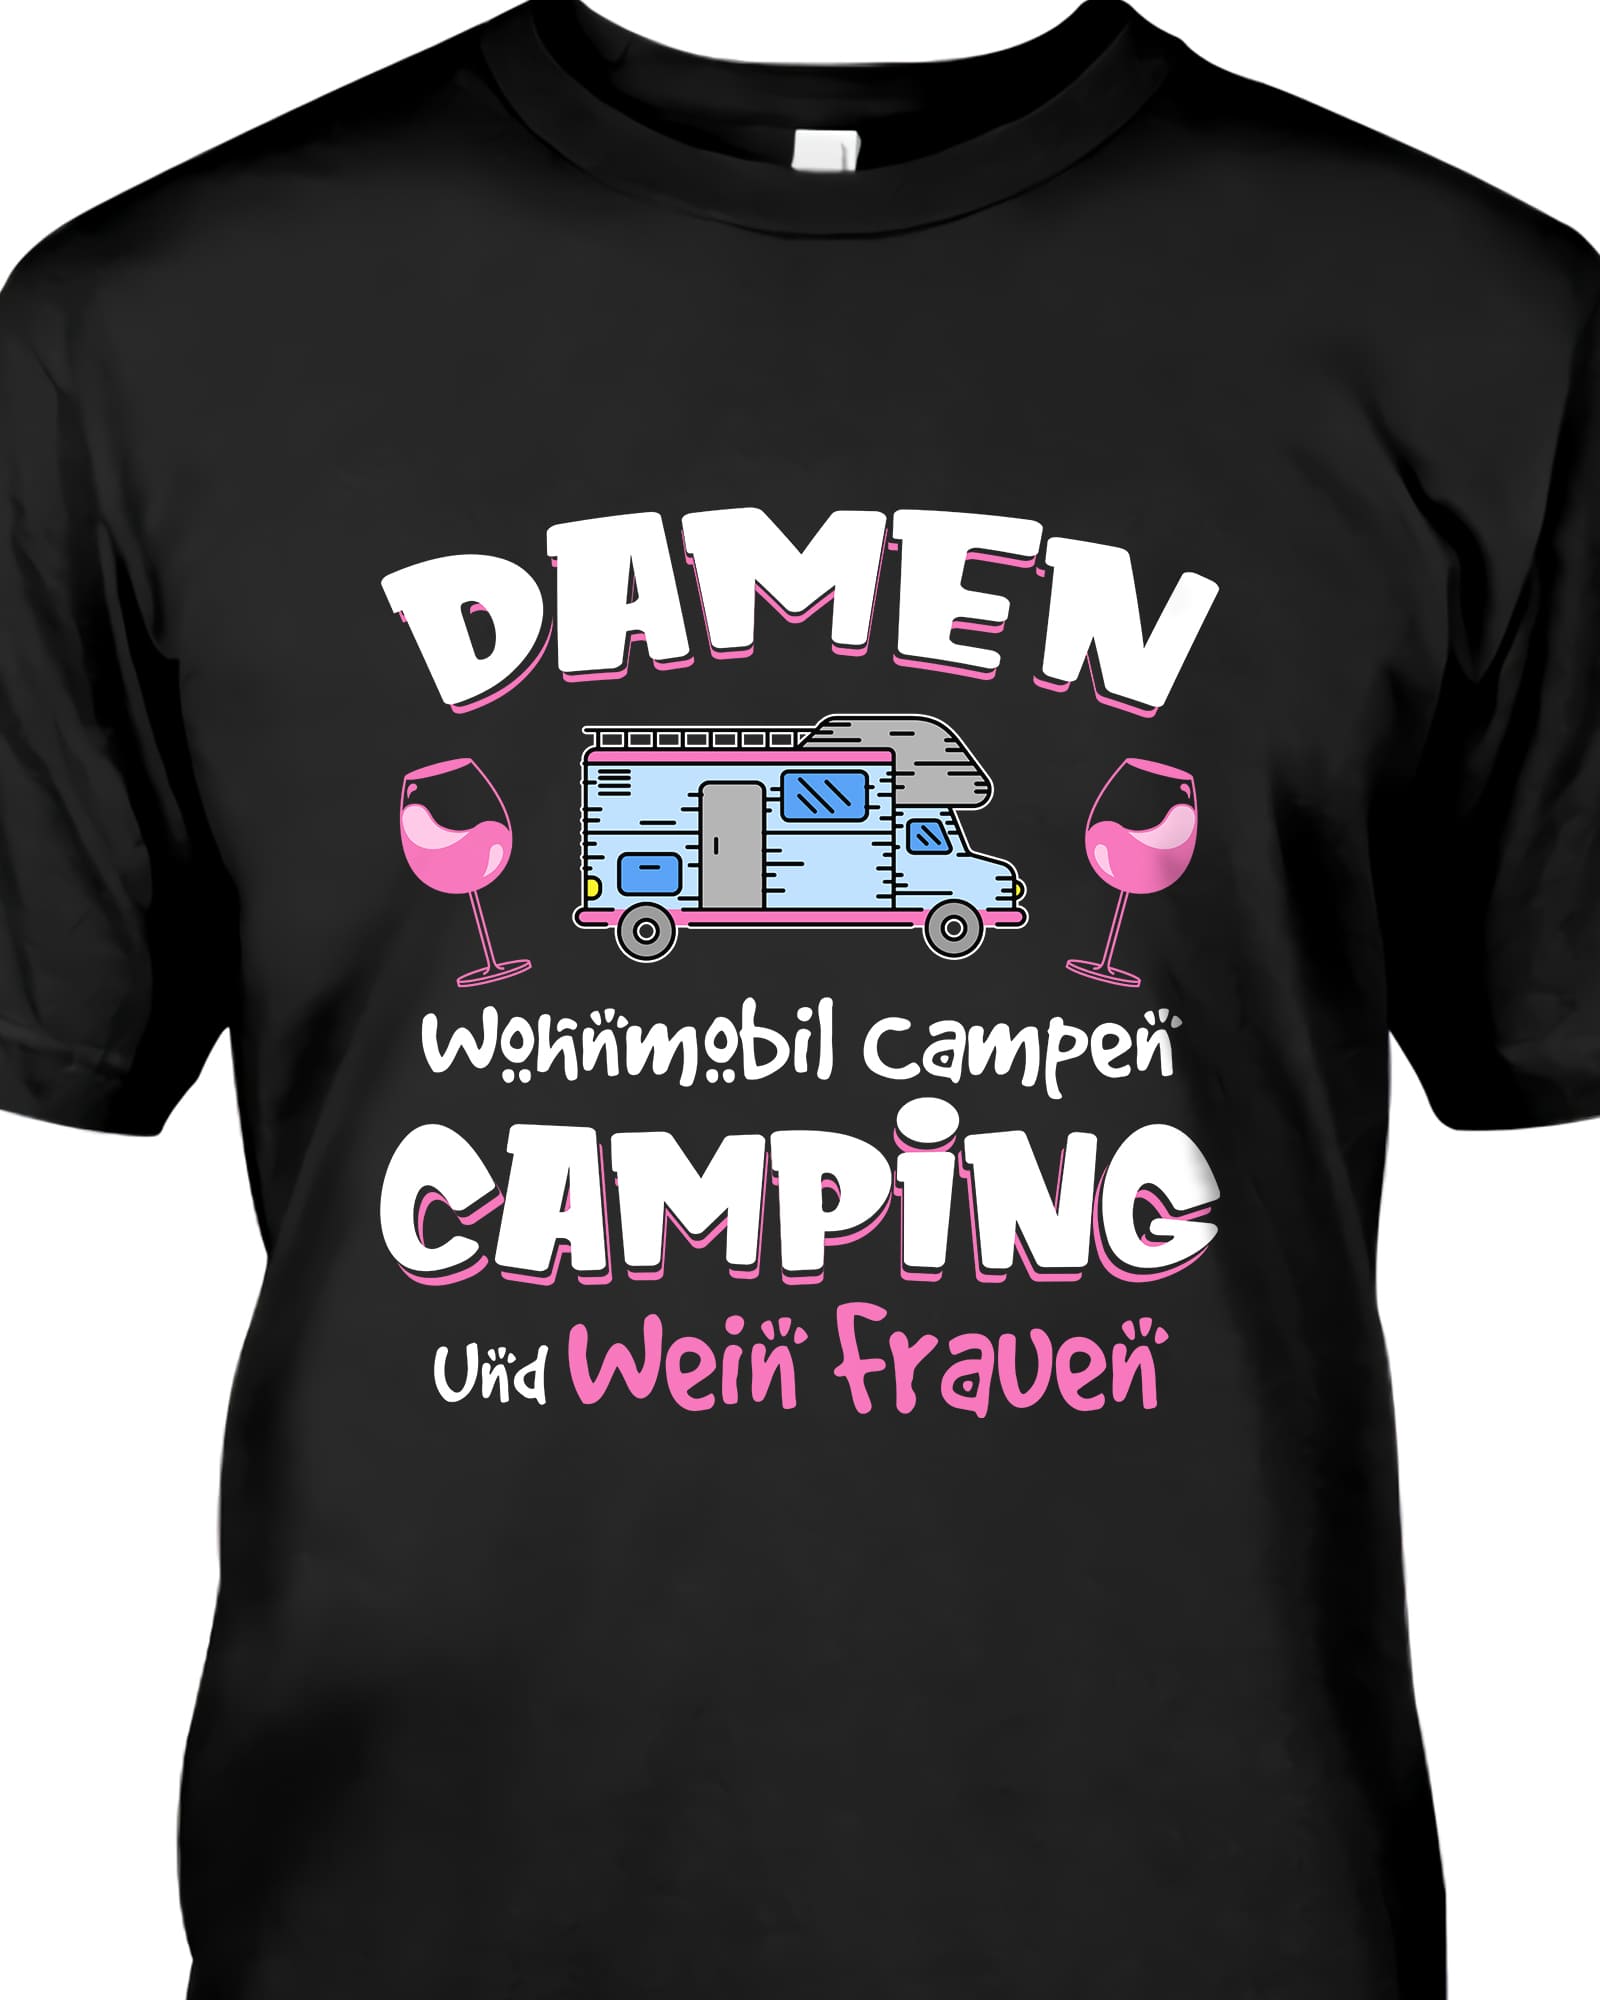 Damen wonnmobil campen camping und wein fraven - Recreational camping vehicle, wine and camping